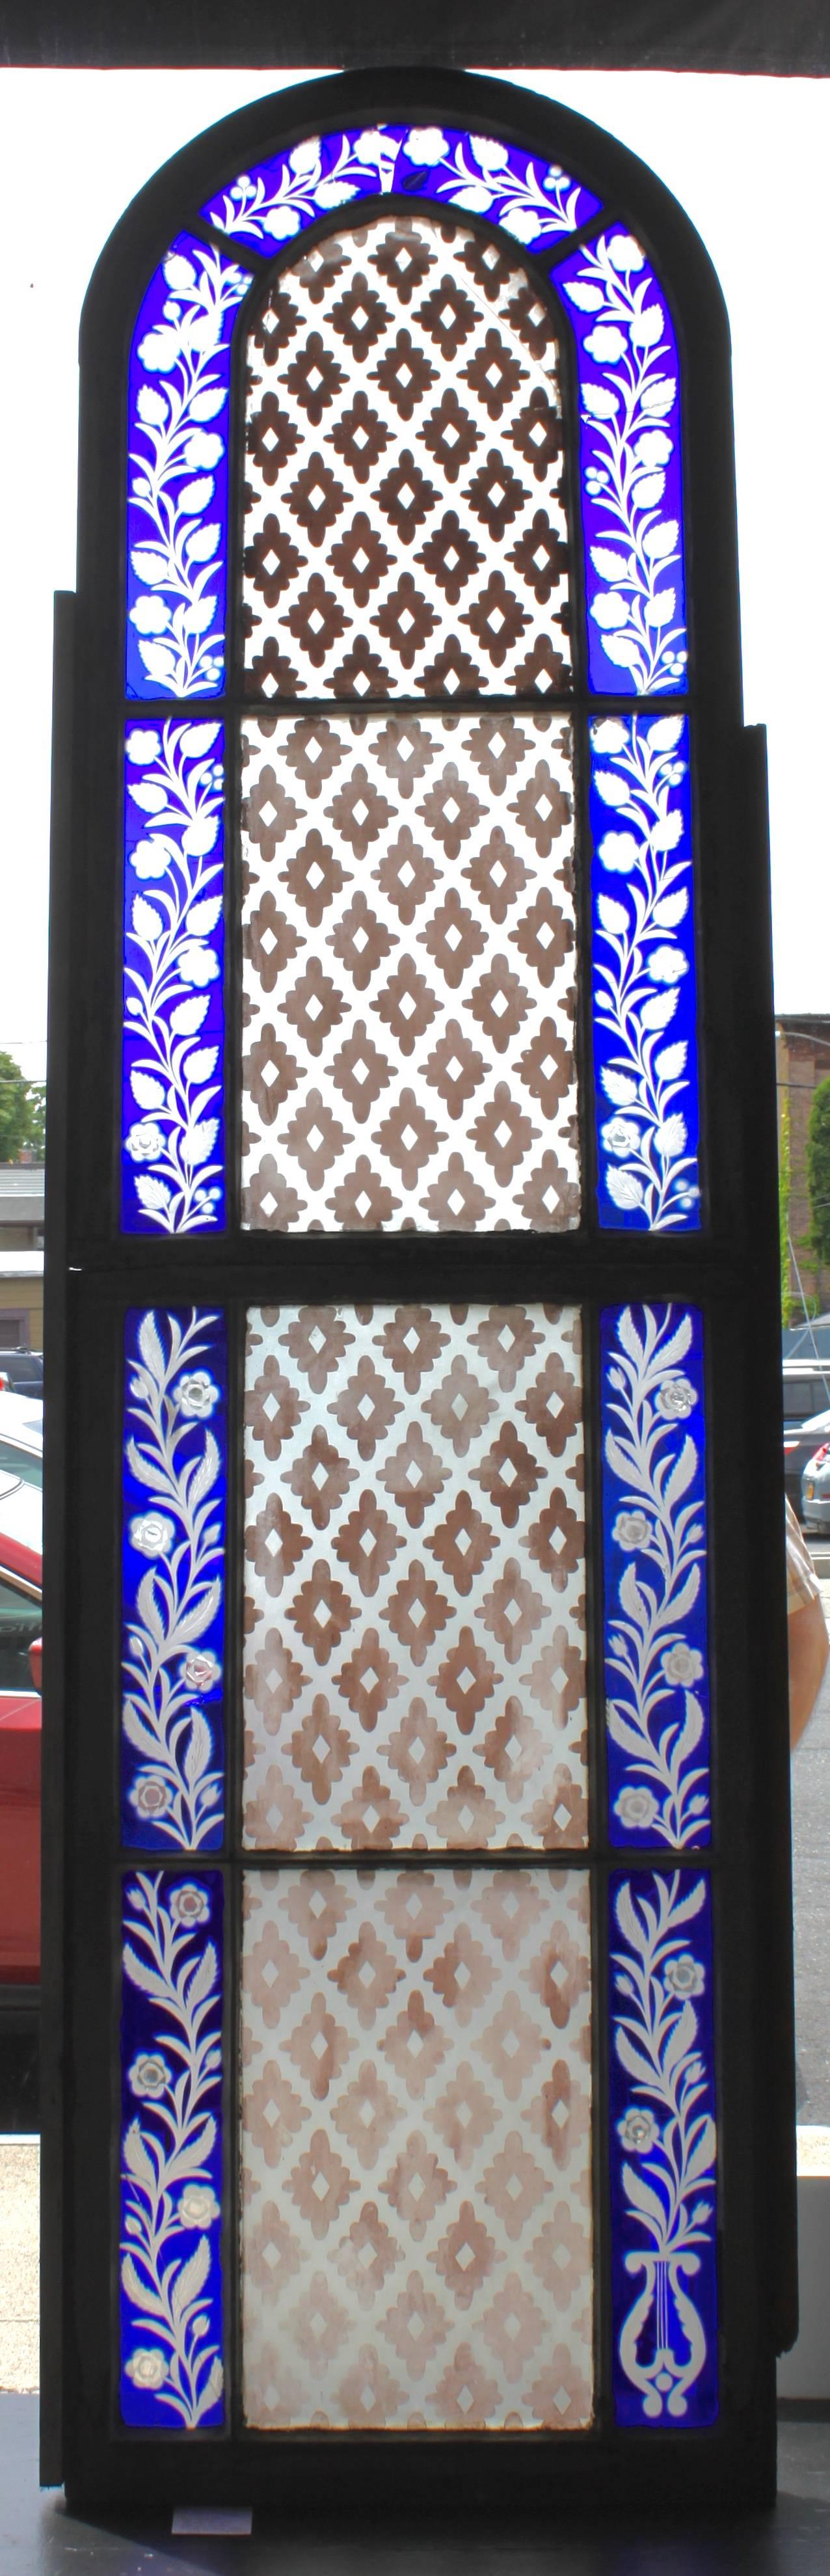 Etched Pair of Mid-19th Century American Stained Glass Windows For Sale